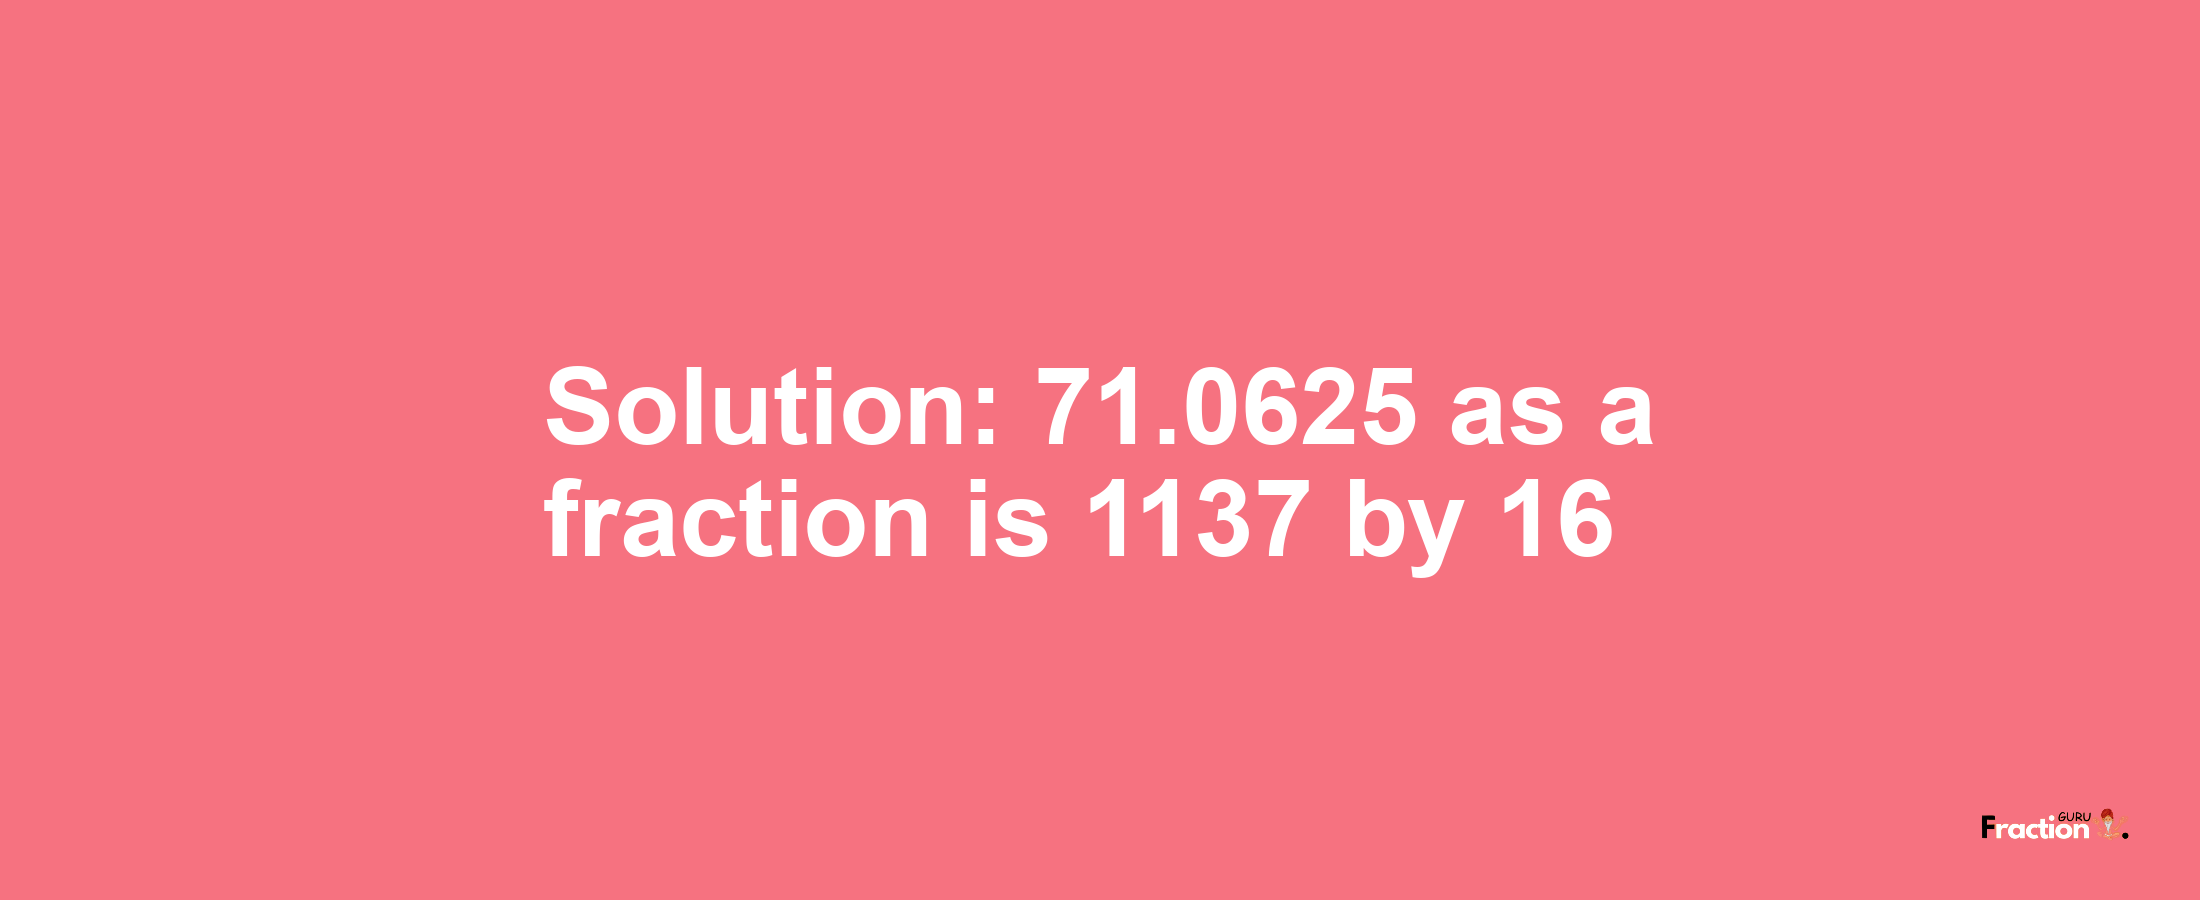 Solution:71.0625 as a fraction is 1137/16